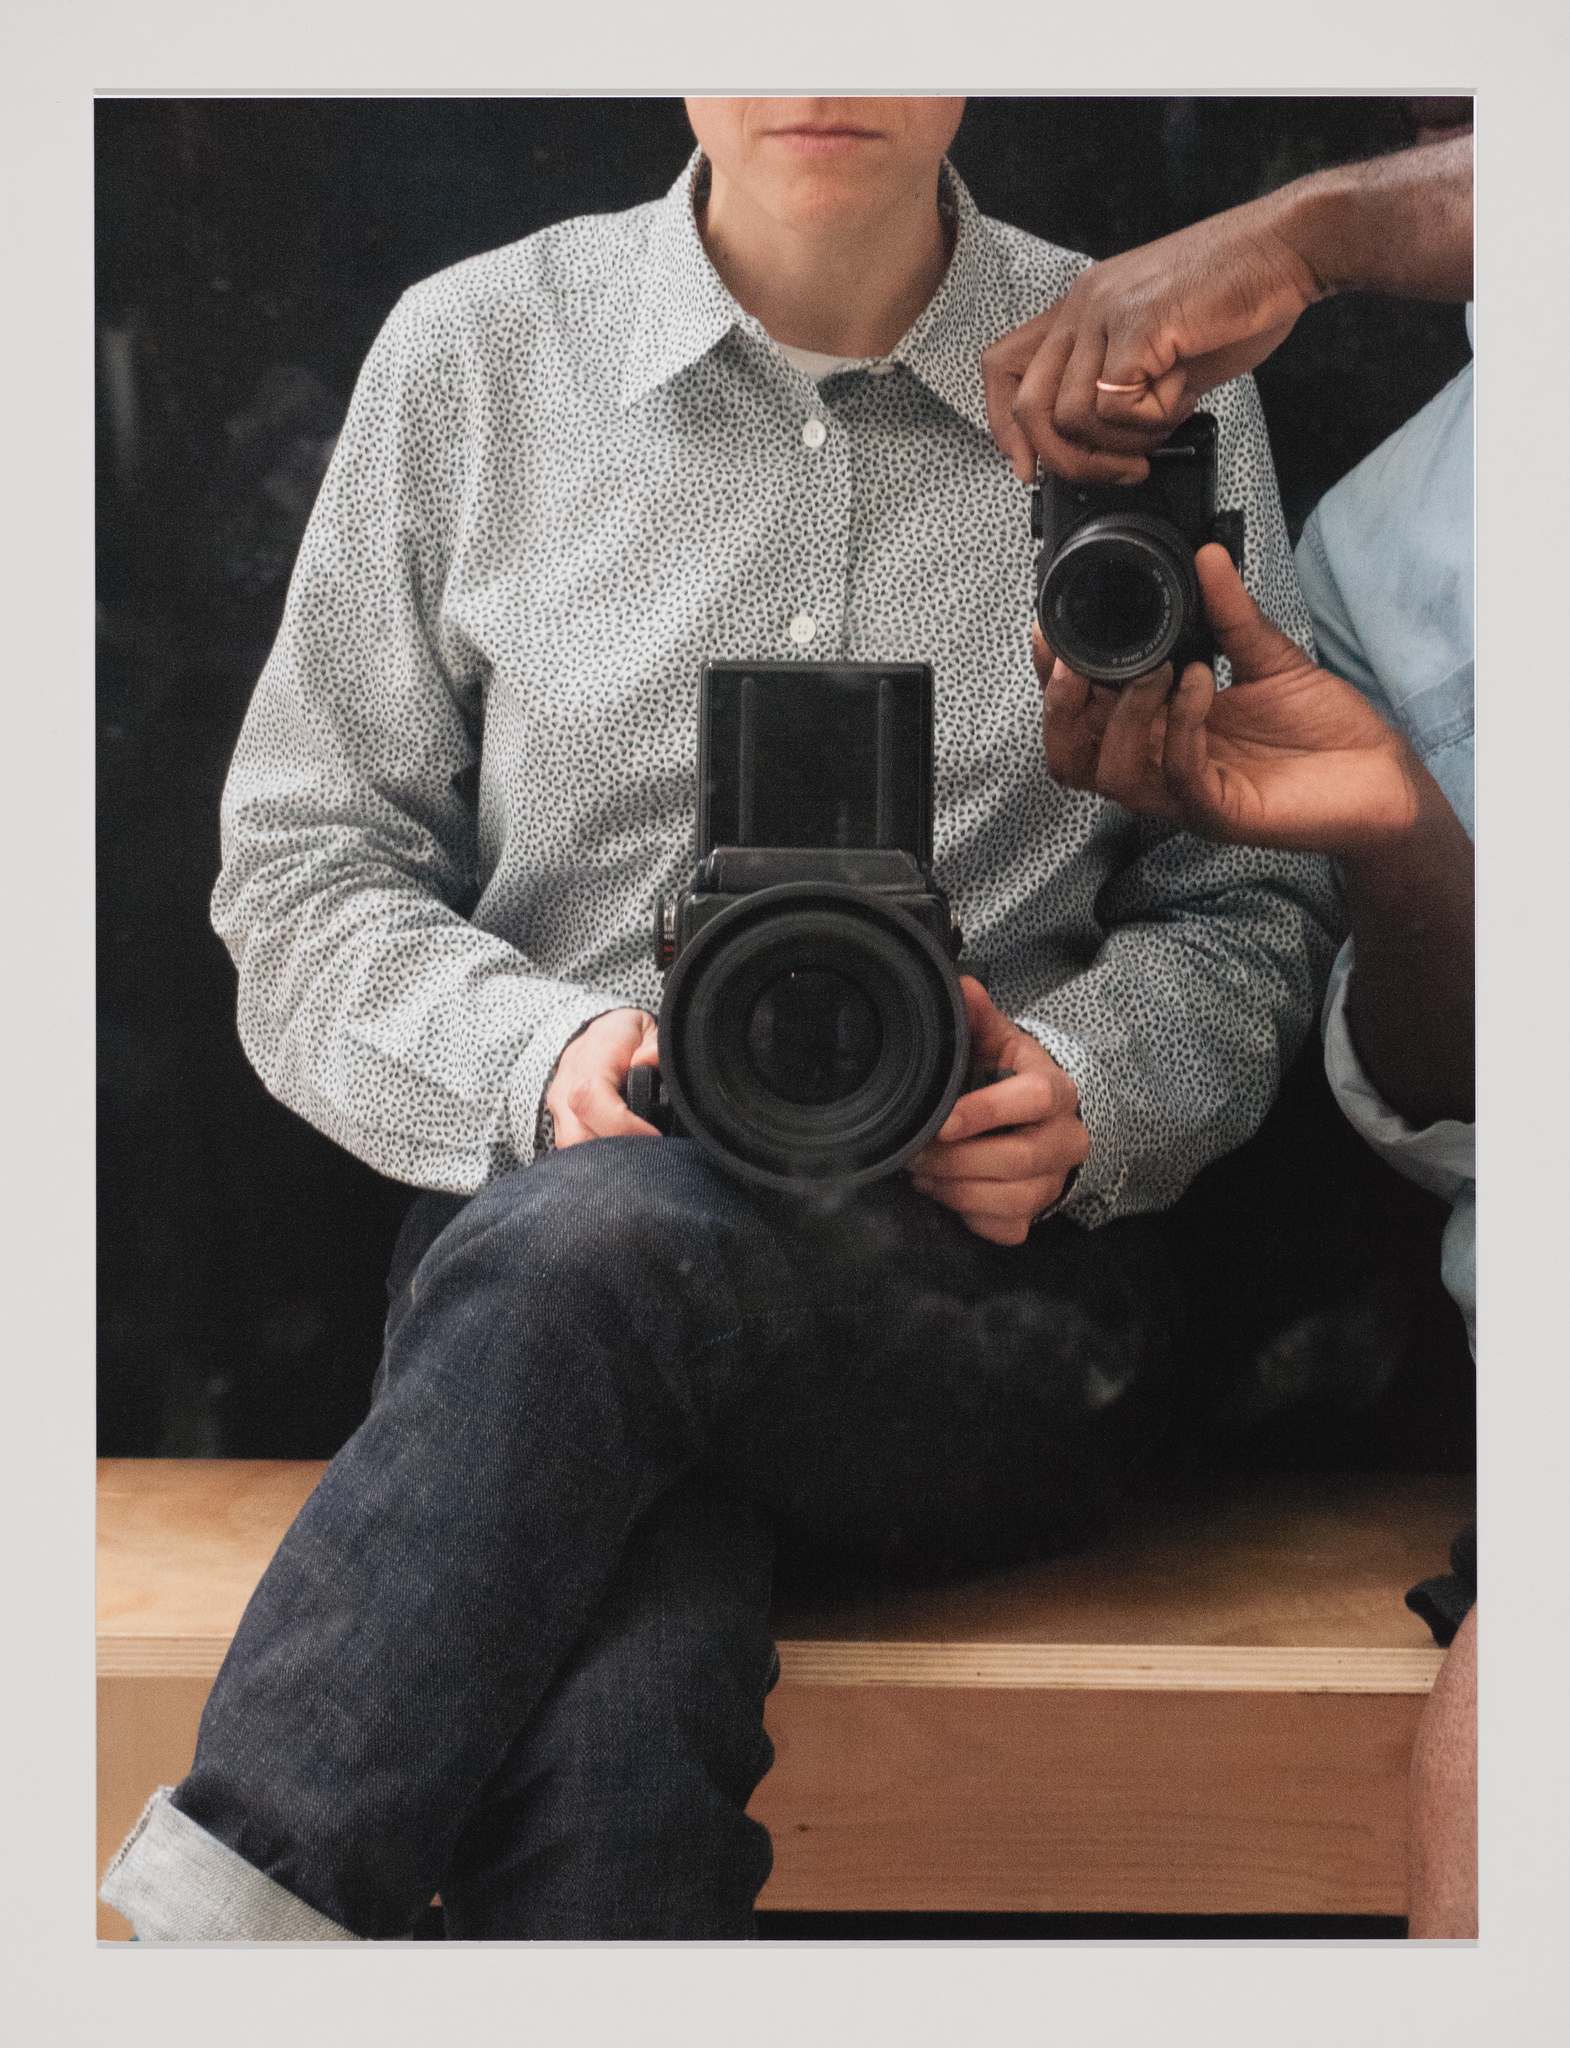 A seated white person holds a large camera in their lap, their face cropped, and a Black person reaches into the frame holding a smaller camera